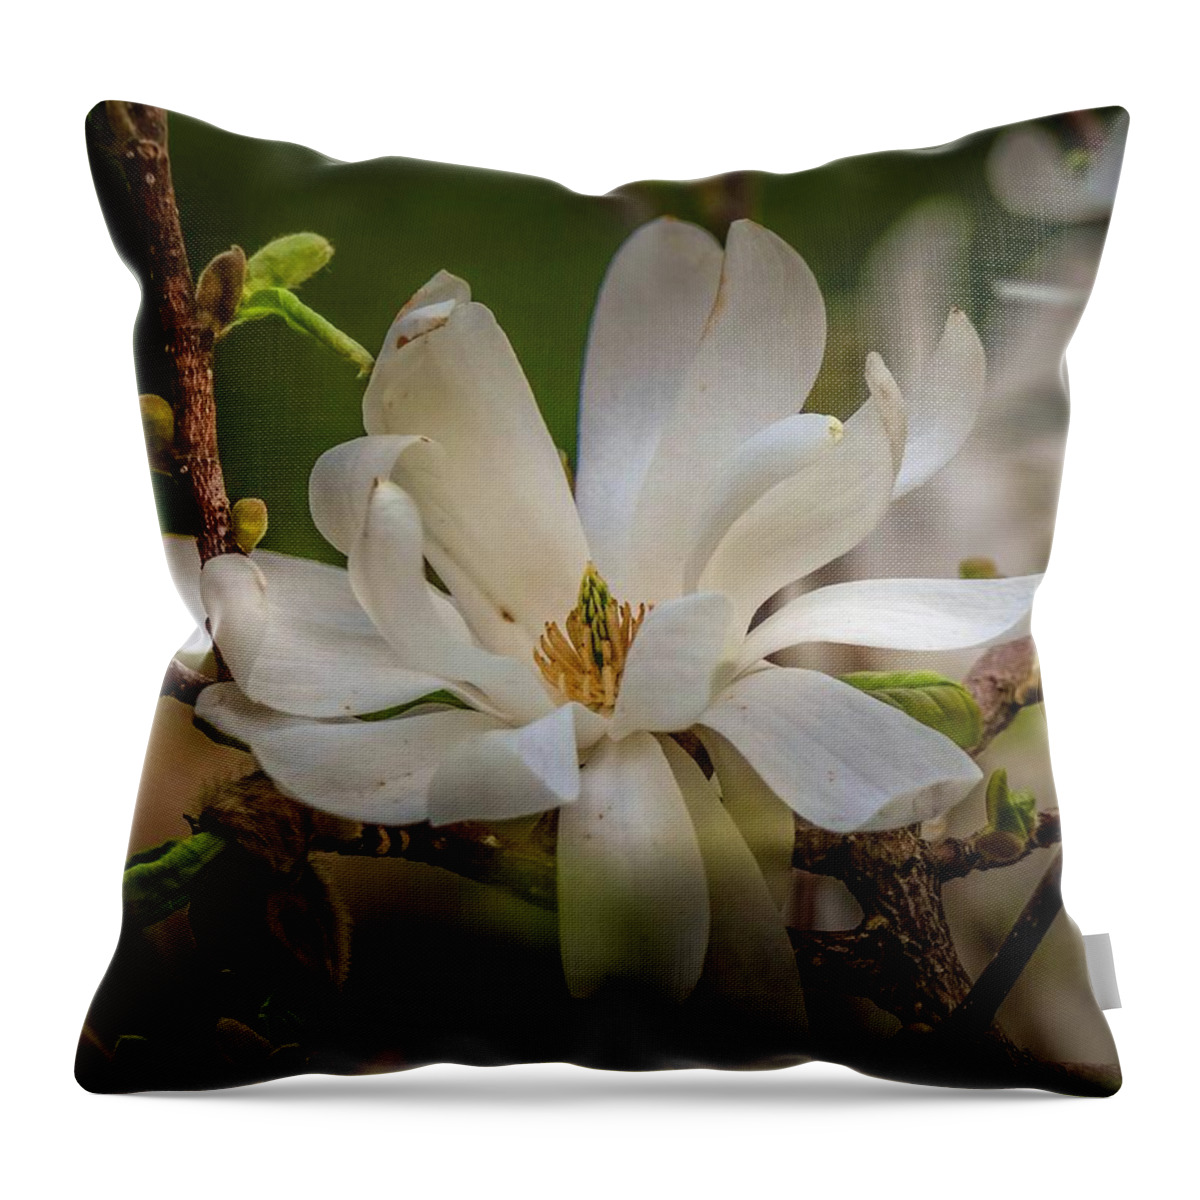 Spring Throw Pillow featuring the photograph Magnolia Flow by Susan Rydberg